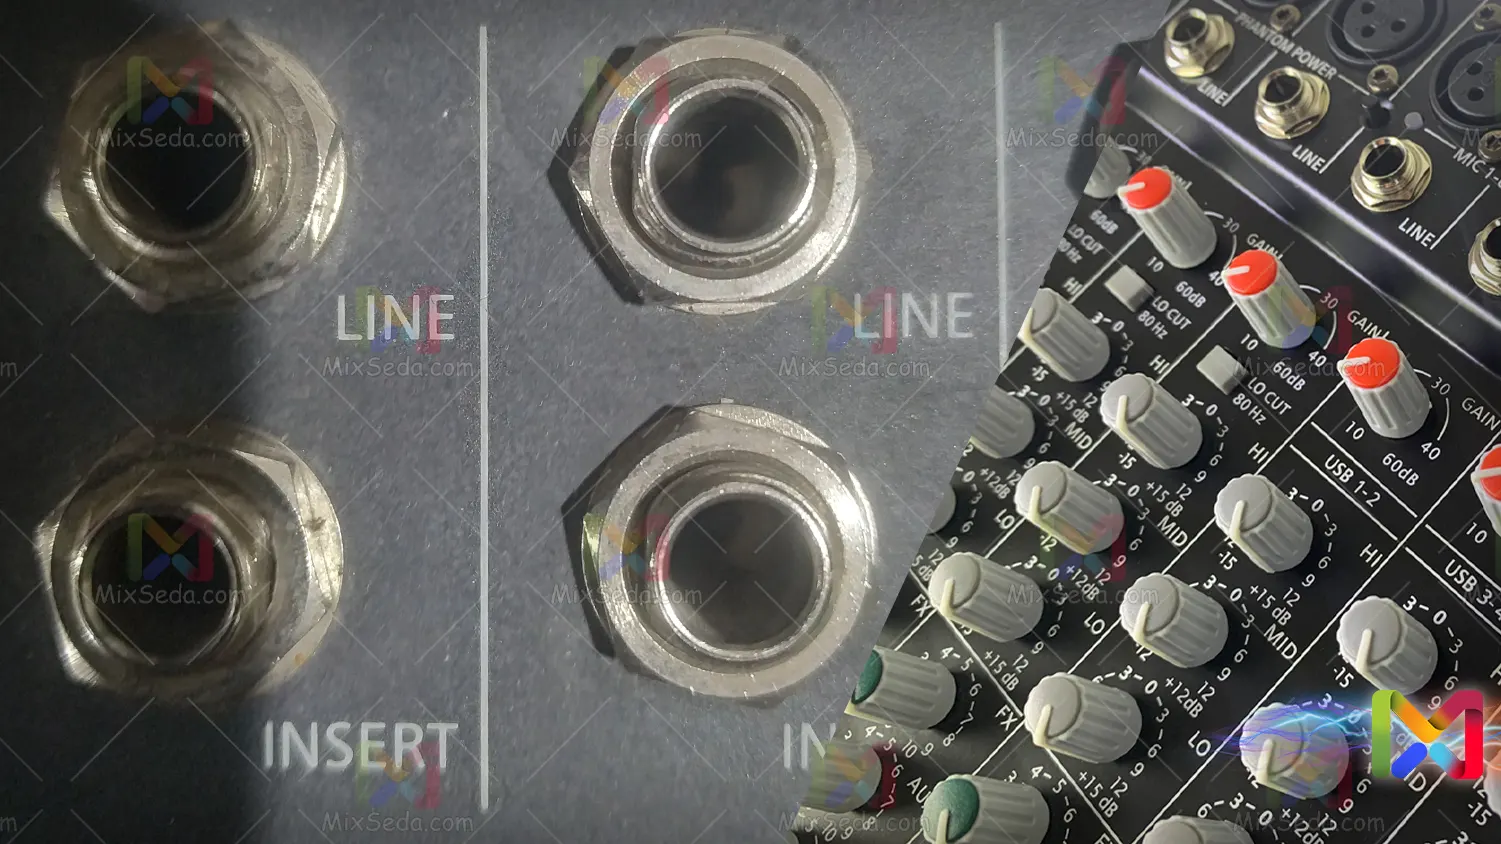 Line input in the mixer